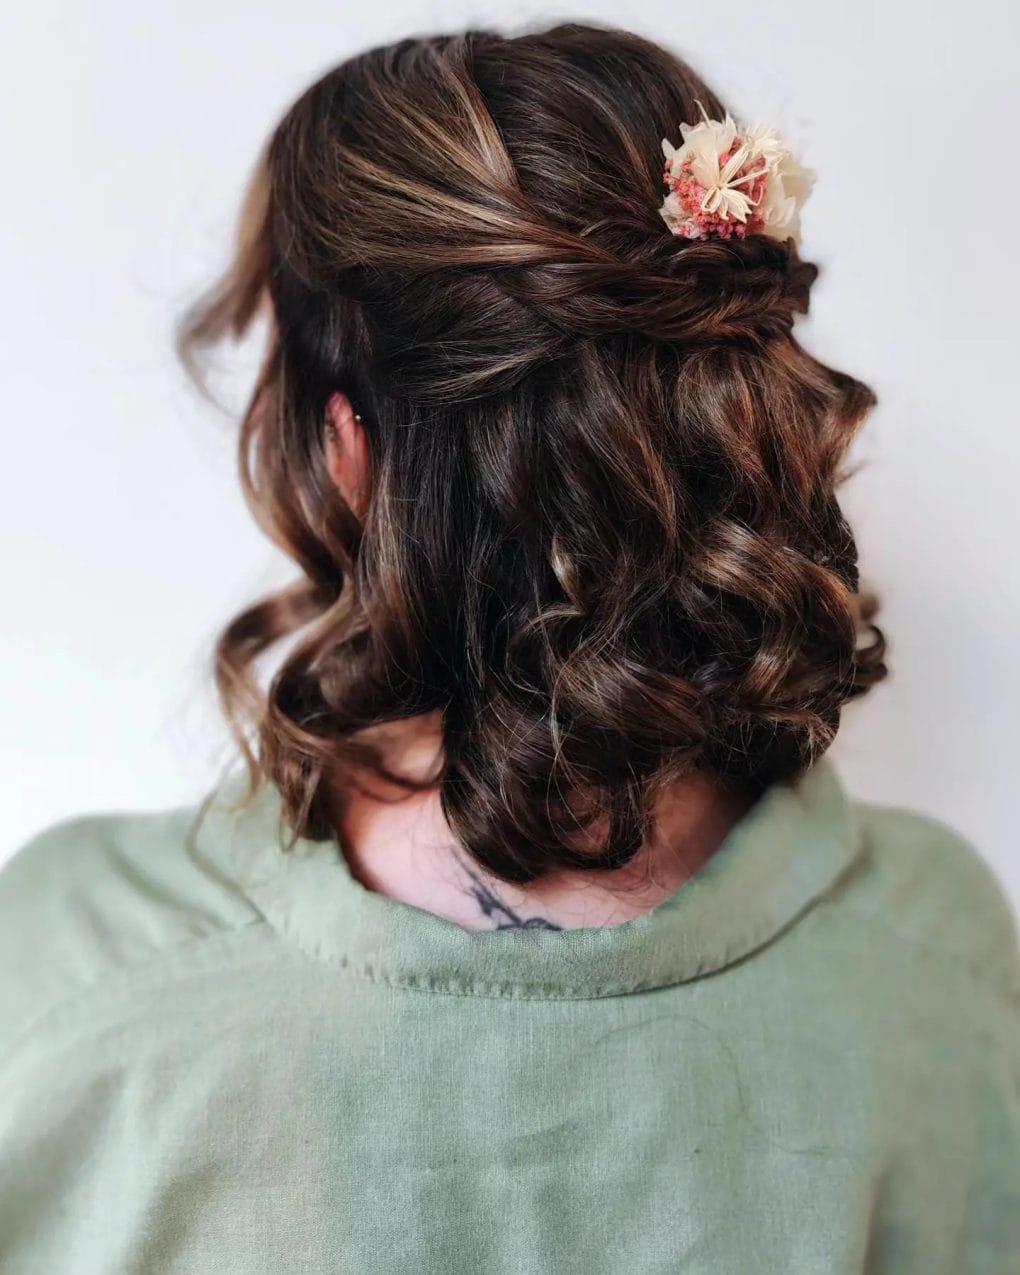 Rich chocolate curls in an intricate side-swept updo with a floral accessory for a birthday soirée.